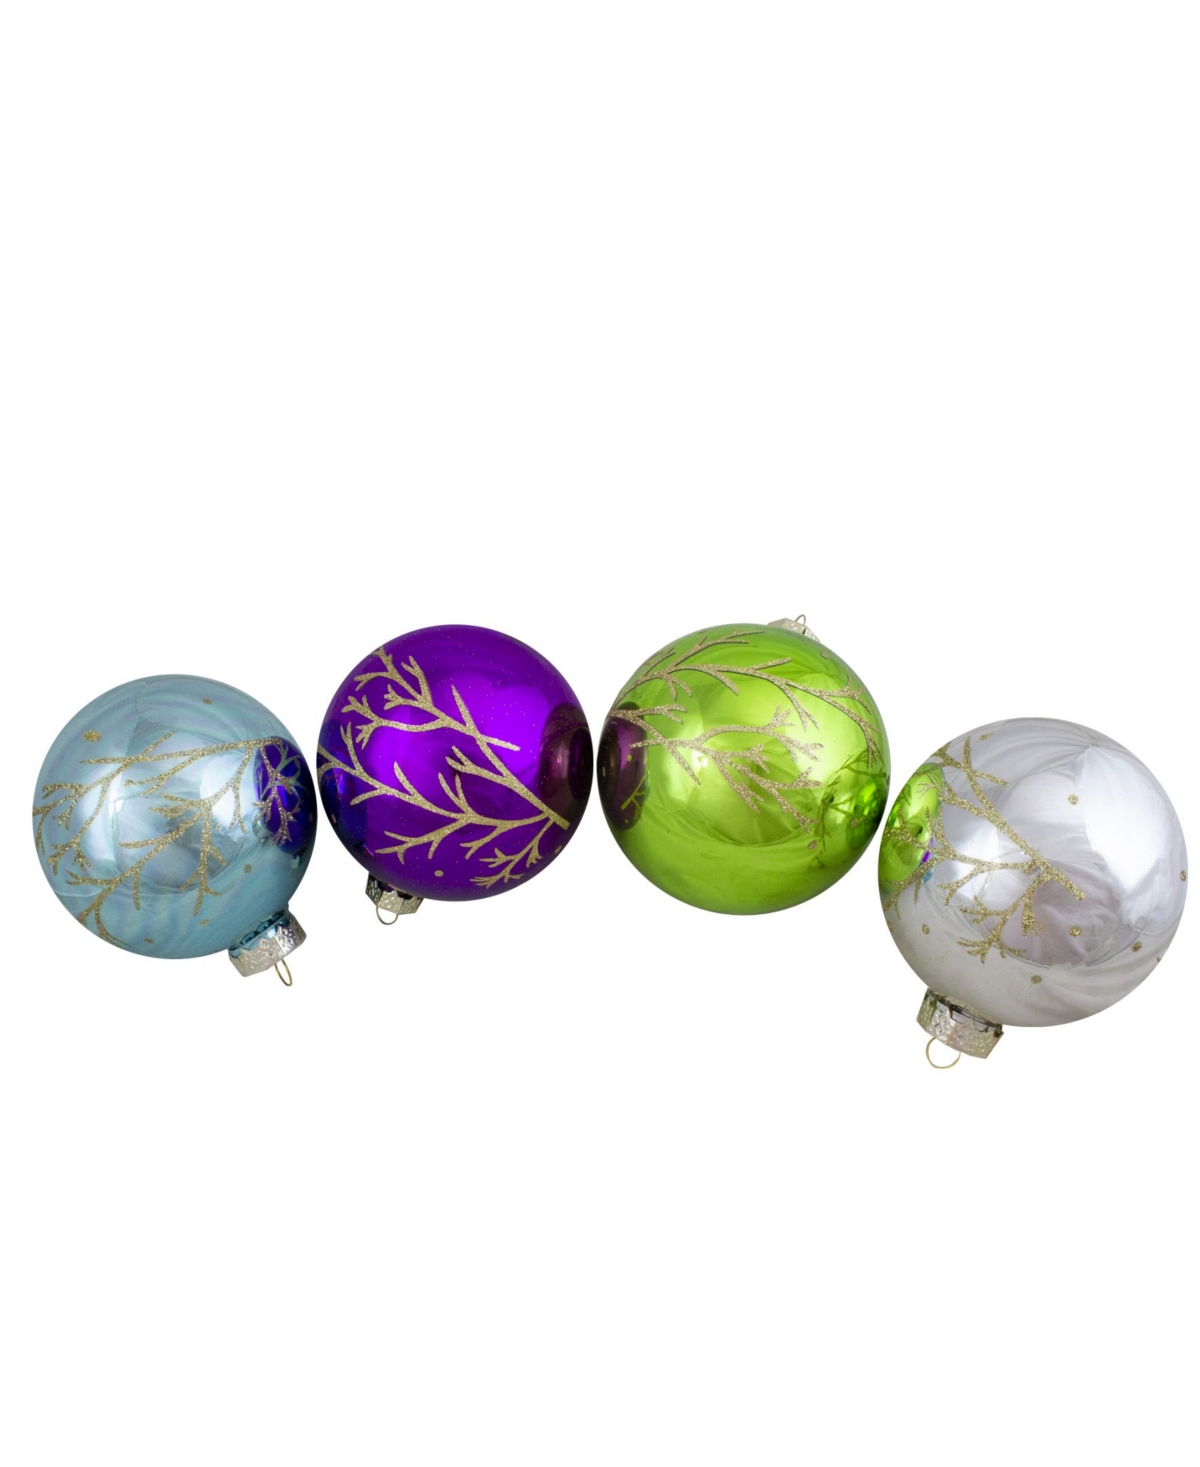 Northlight 4" Shiny Glass Ball Christmas Ornaments Set, 4 Pieces In Multi-colored